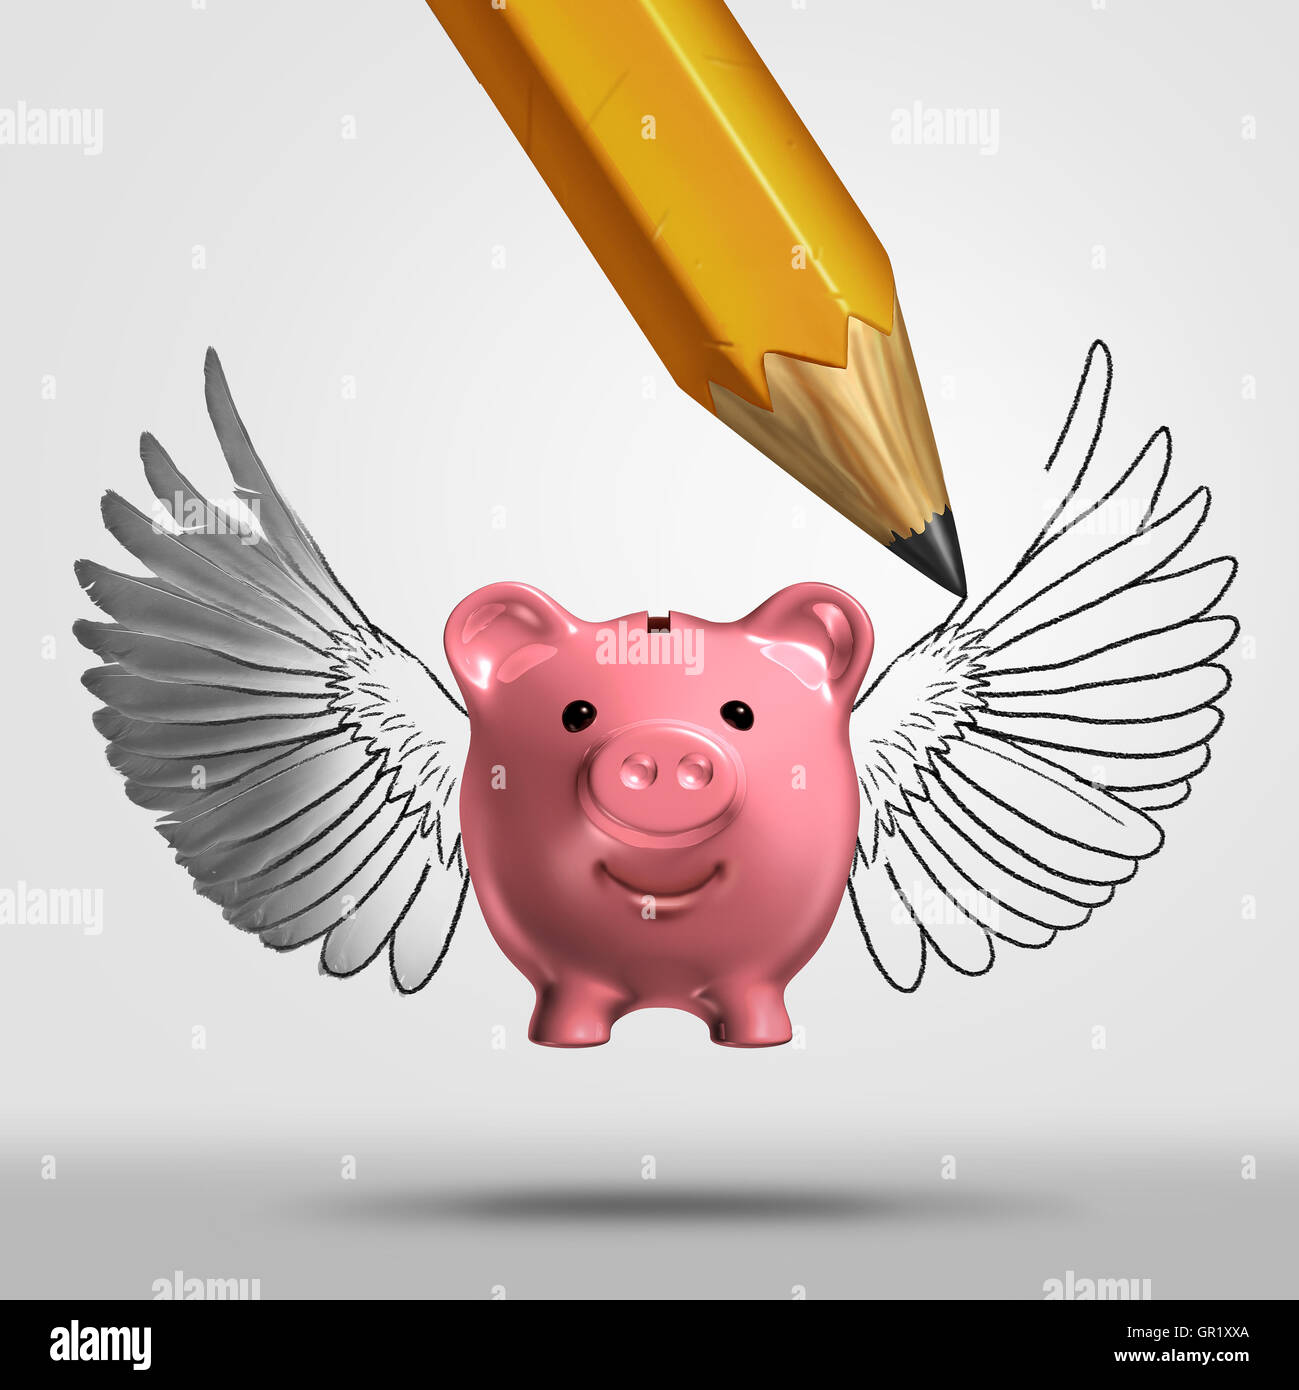 Banking planning and bank advice business concept or wealth plan assistance as a piggy bank with a pencil drawing wings as an investing success and financial metaphor with 3D illustration elements. Stock Photo